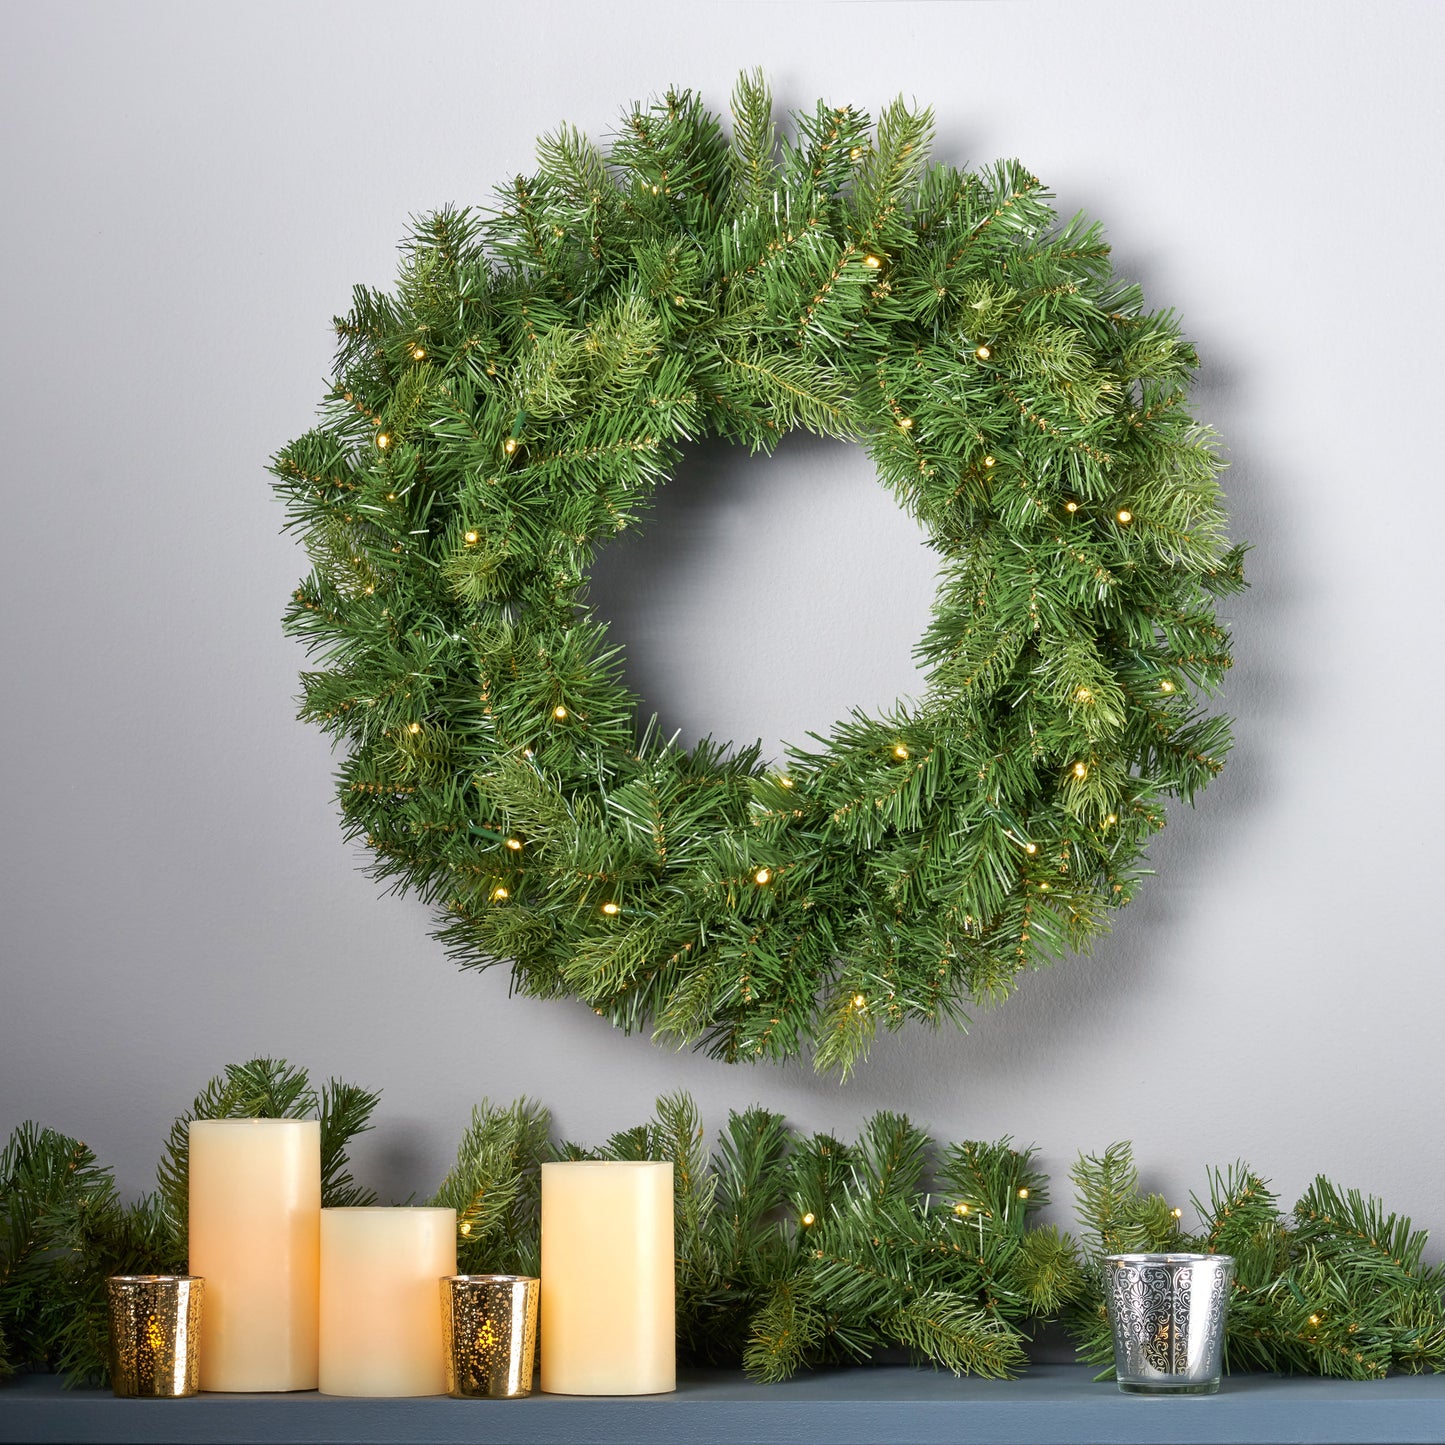 24" Mixed Spruce Warm White LED Artificial Christmas Wreath